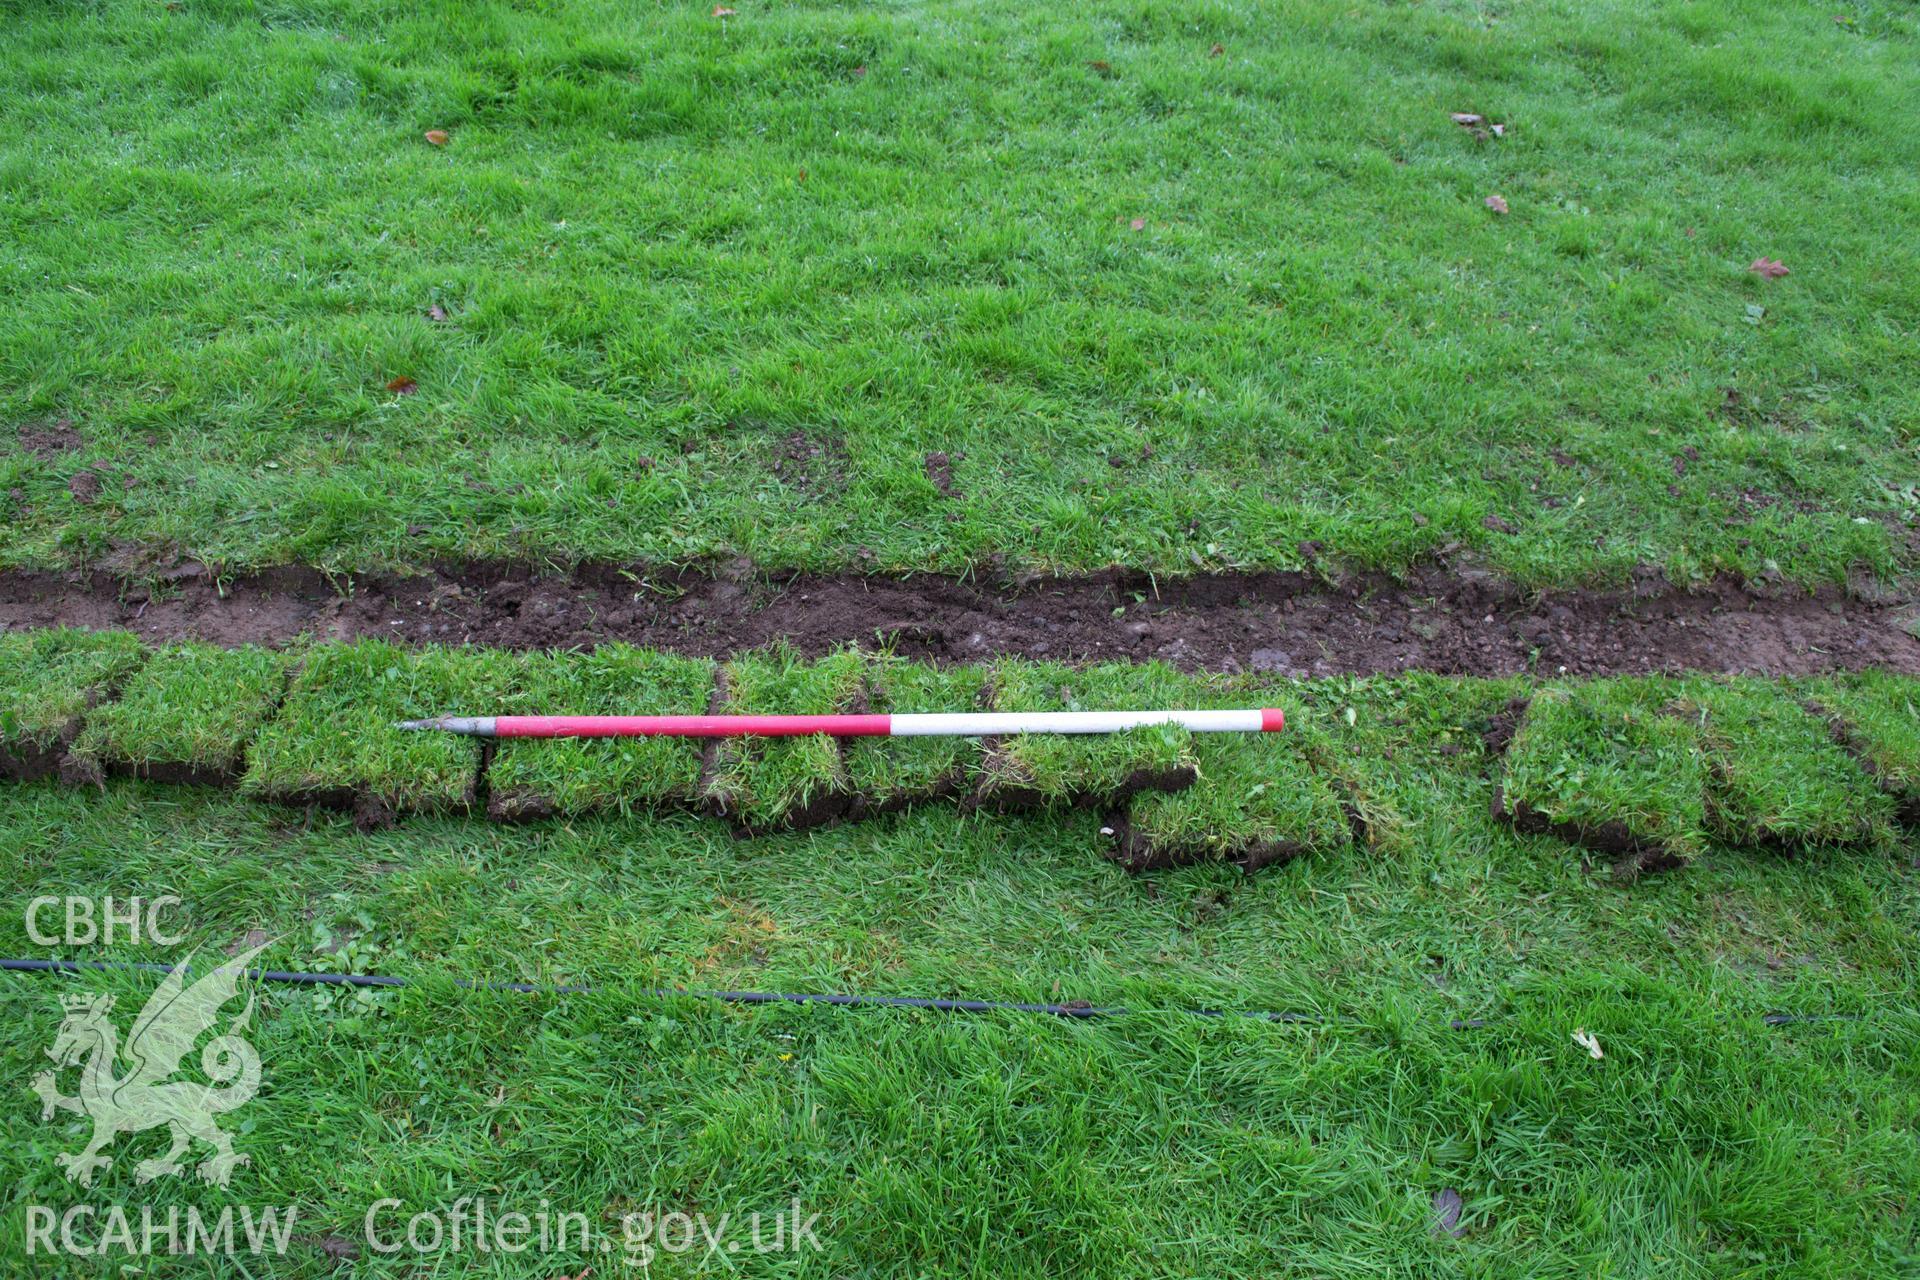 Detailed view from south of 0.3m wide trench area, showing modern service trench. Photographed during archaeological watching brief of Plas Newydd, Ynys Mon, conducted by Gwynedd Archaeological Trust on 14th November 2017. Project no. 2542.